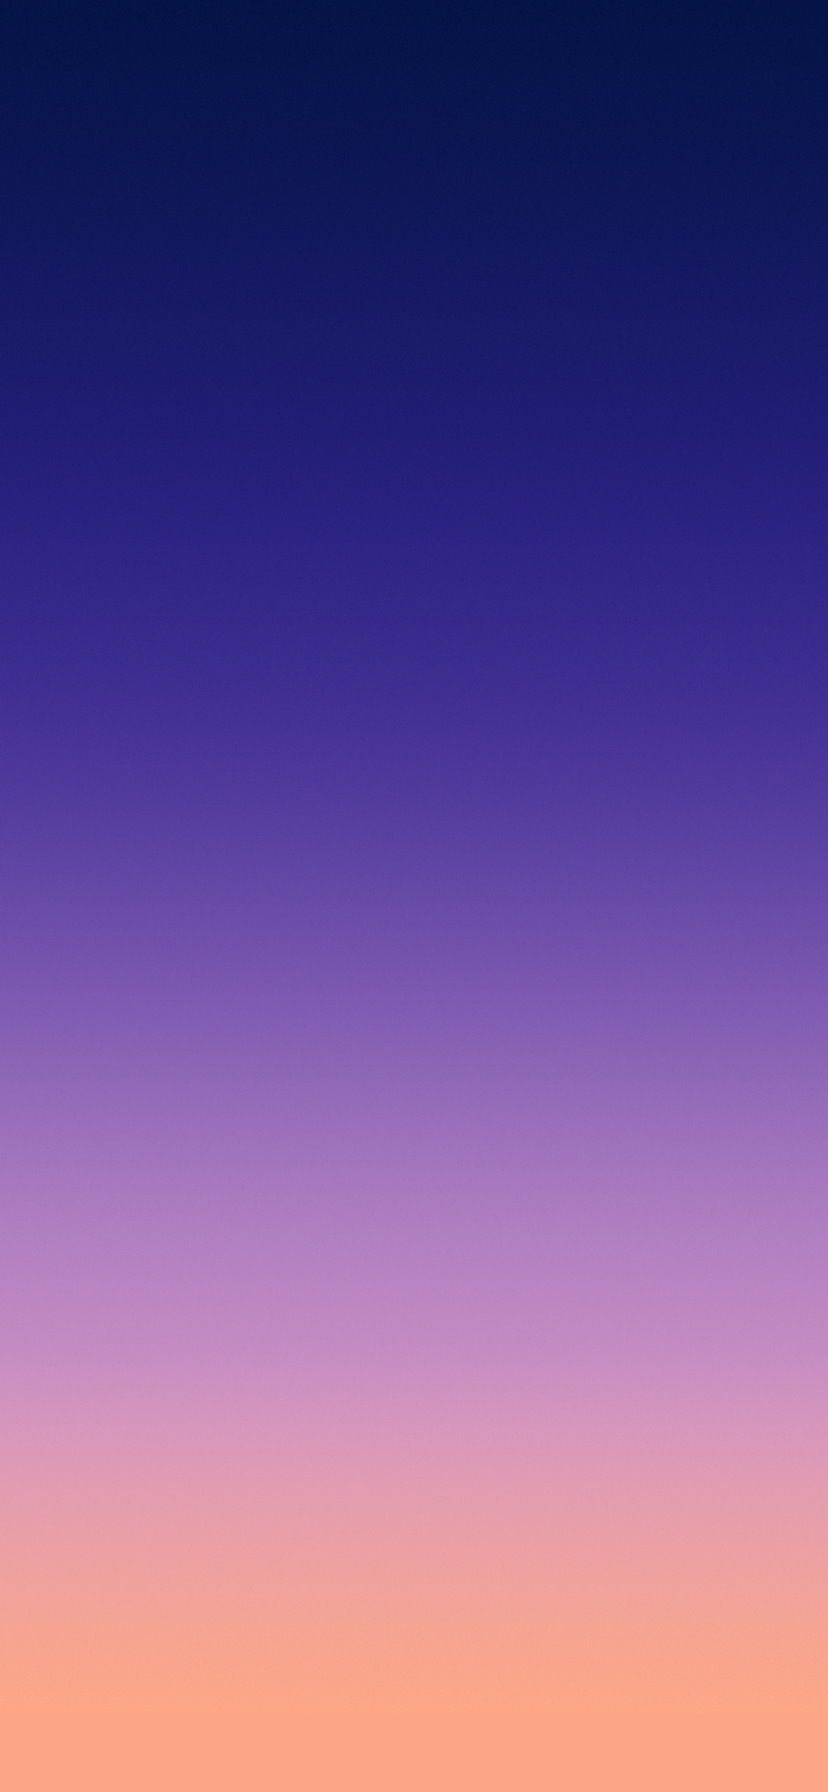 iPhone XR Colors Wallpaper Free iPhone XR Colors Background